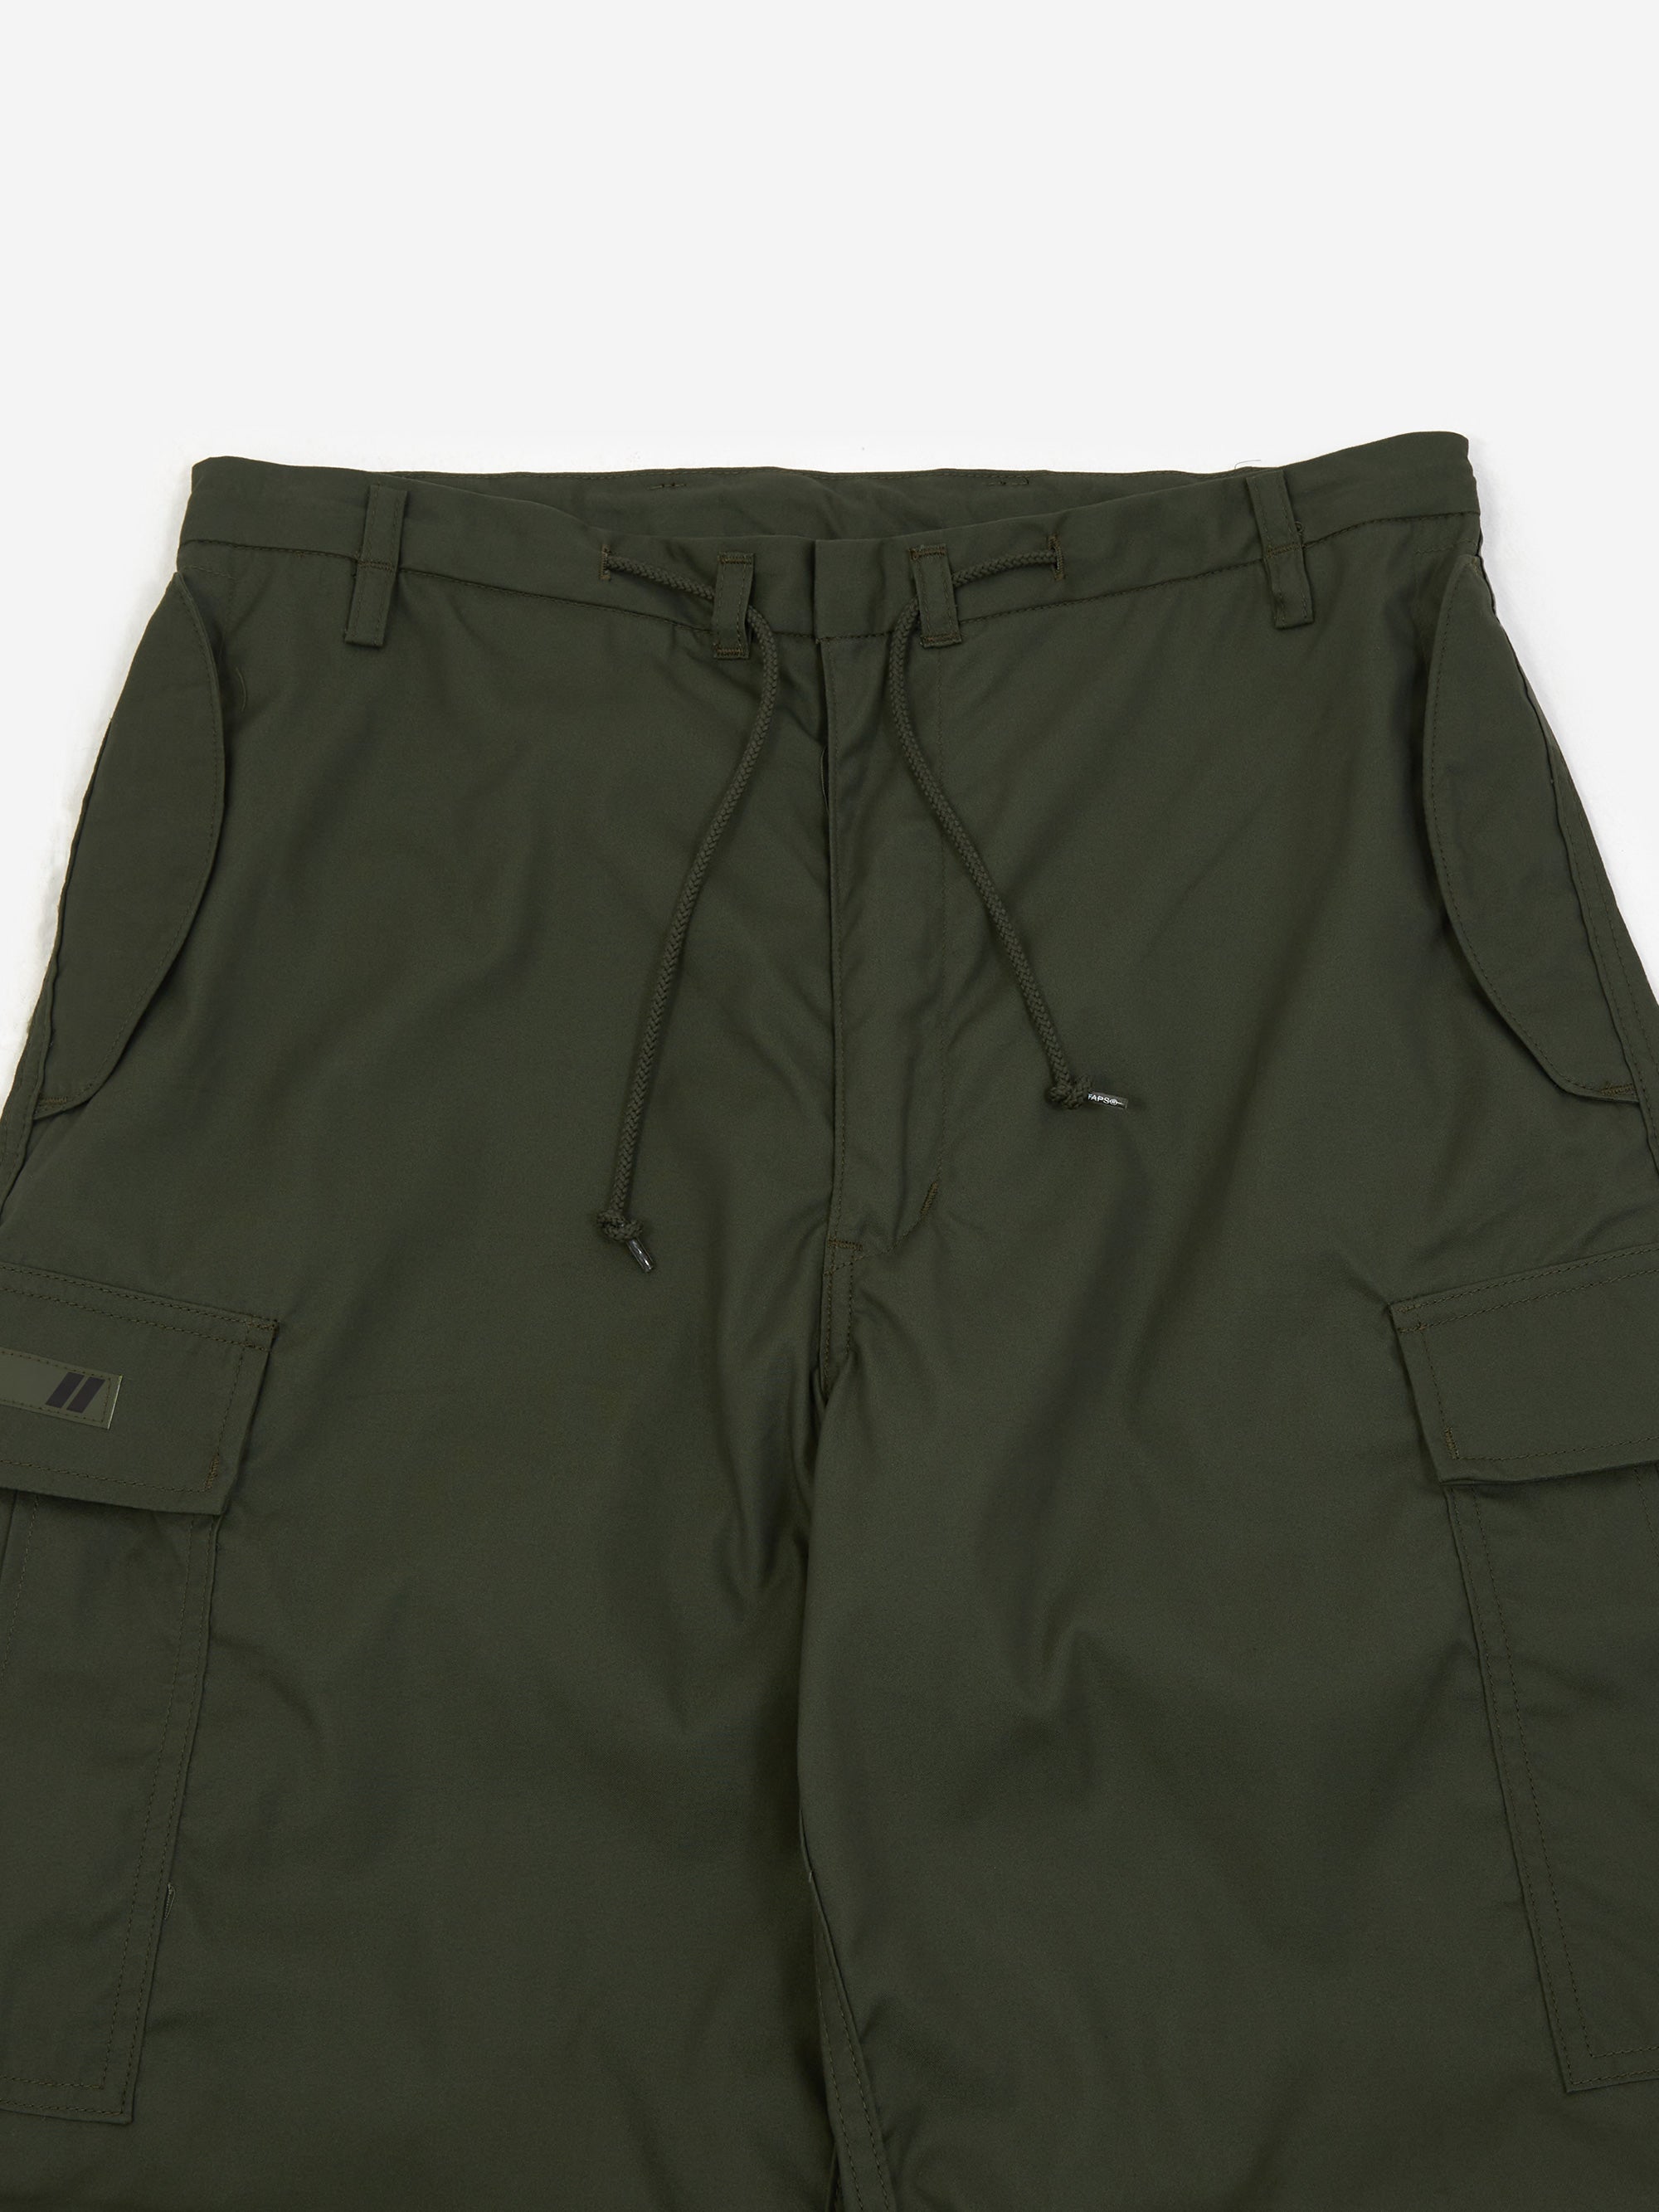 WTAPS MILT0001 / Trousers 14 / NYCO. Oxford - Olive Drab – Goodhood